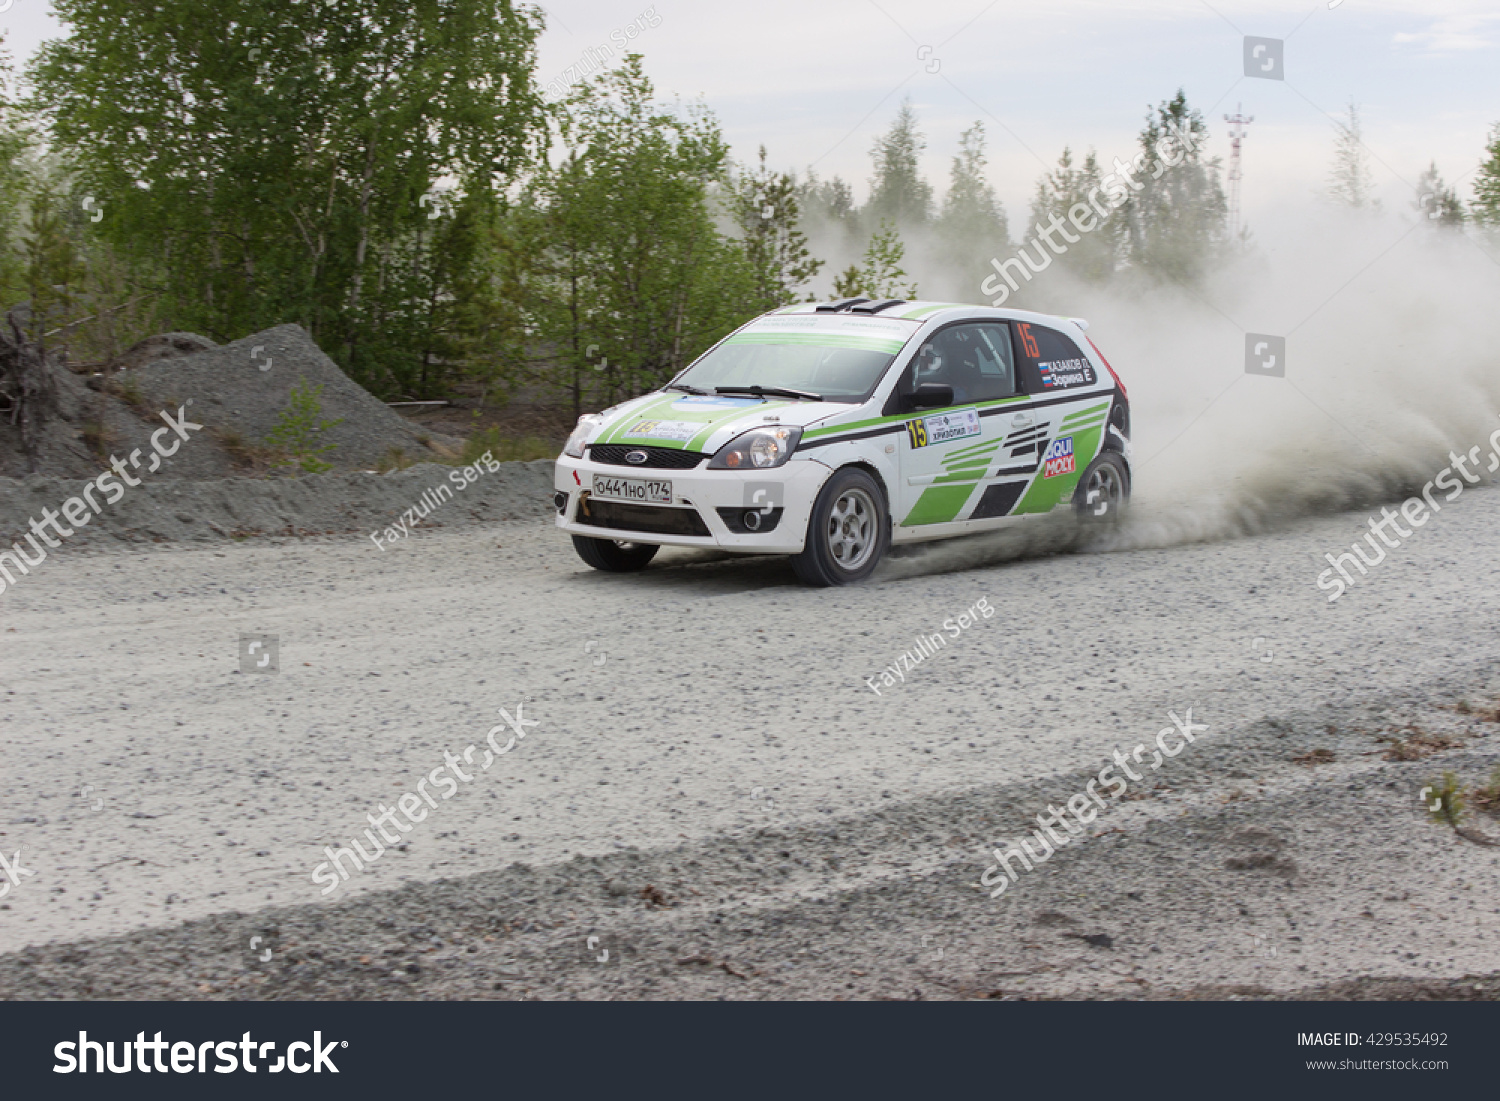 Asbest, Russia, 22 May 2016 - Rally "Ural chrysotile in 2016" 10-th round of the Russian Cup, starting number 15, the car Ford Fiesta, Kazakov driver #429535492